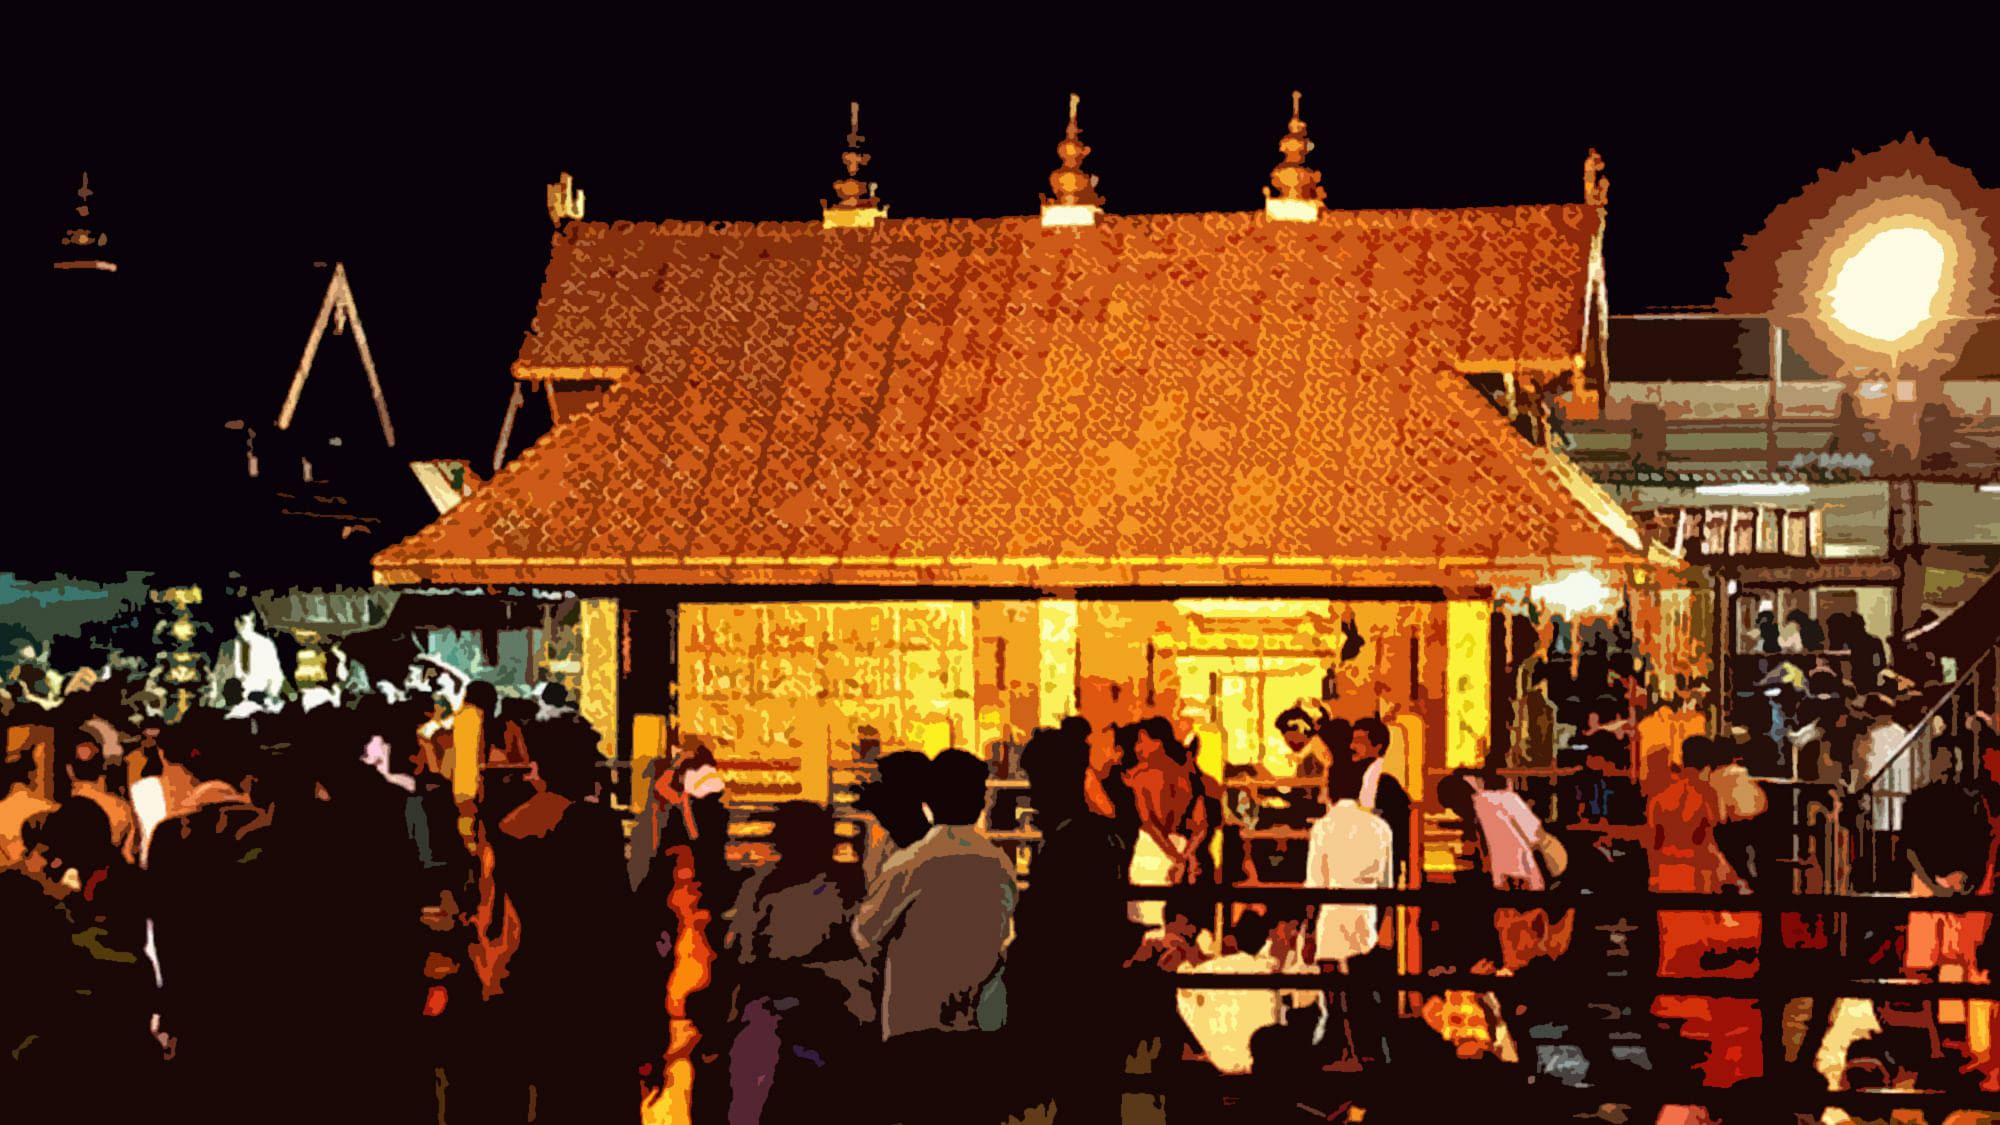 Sabarimala Temple, Kerala denies entry of women and girls between 10-50 years into the temple. 